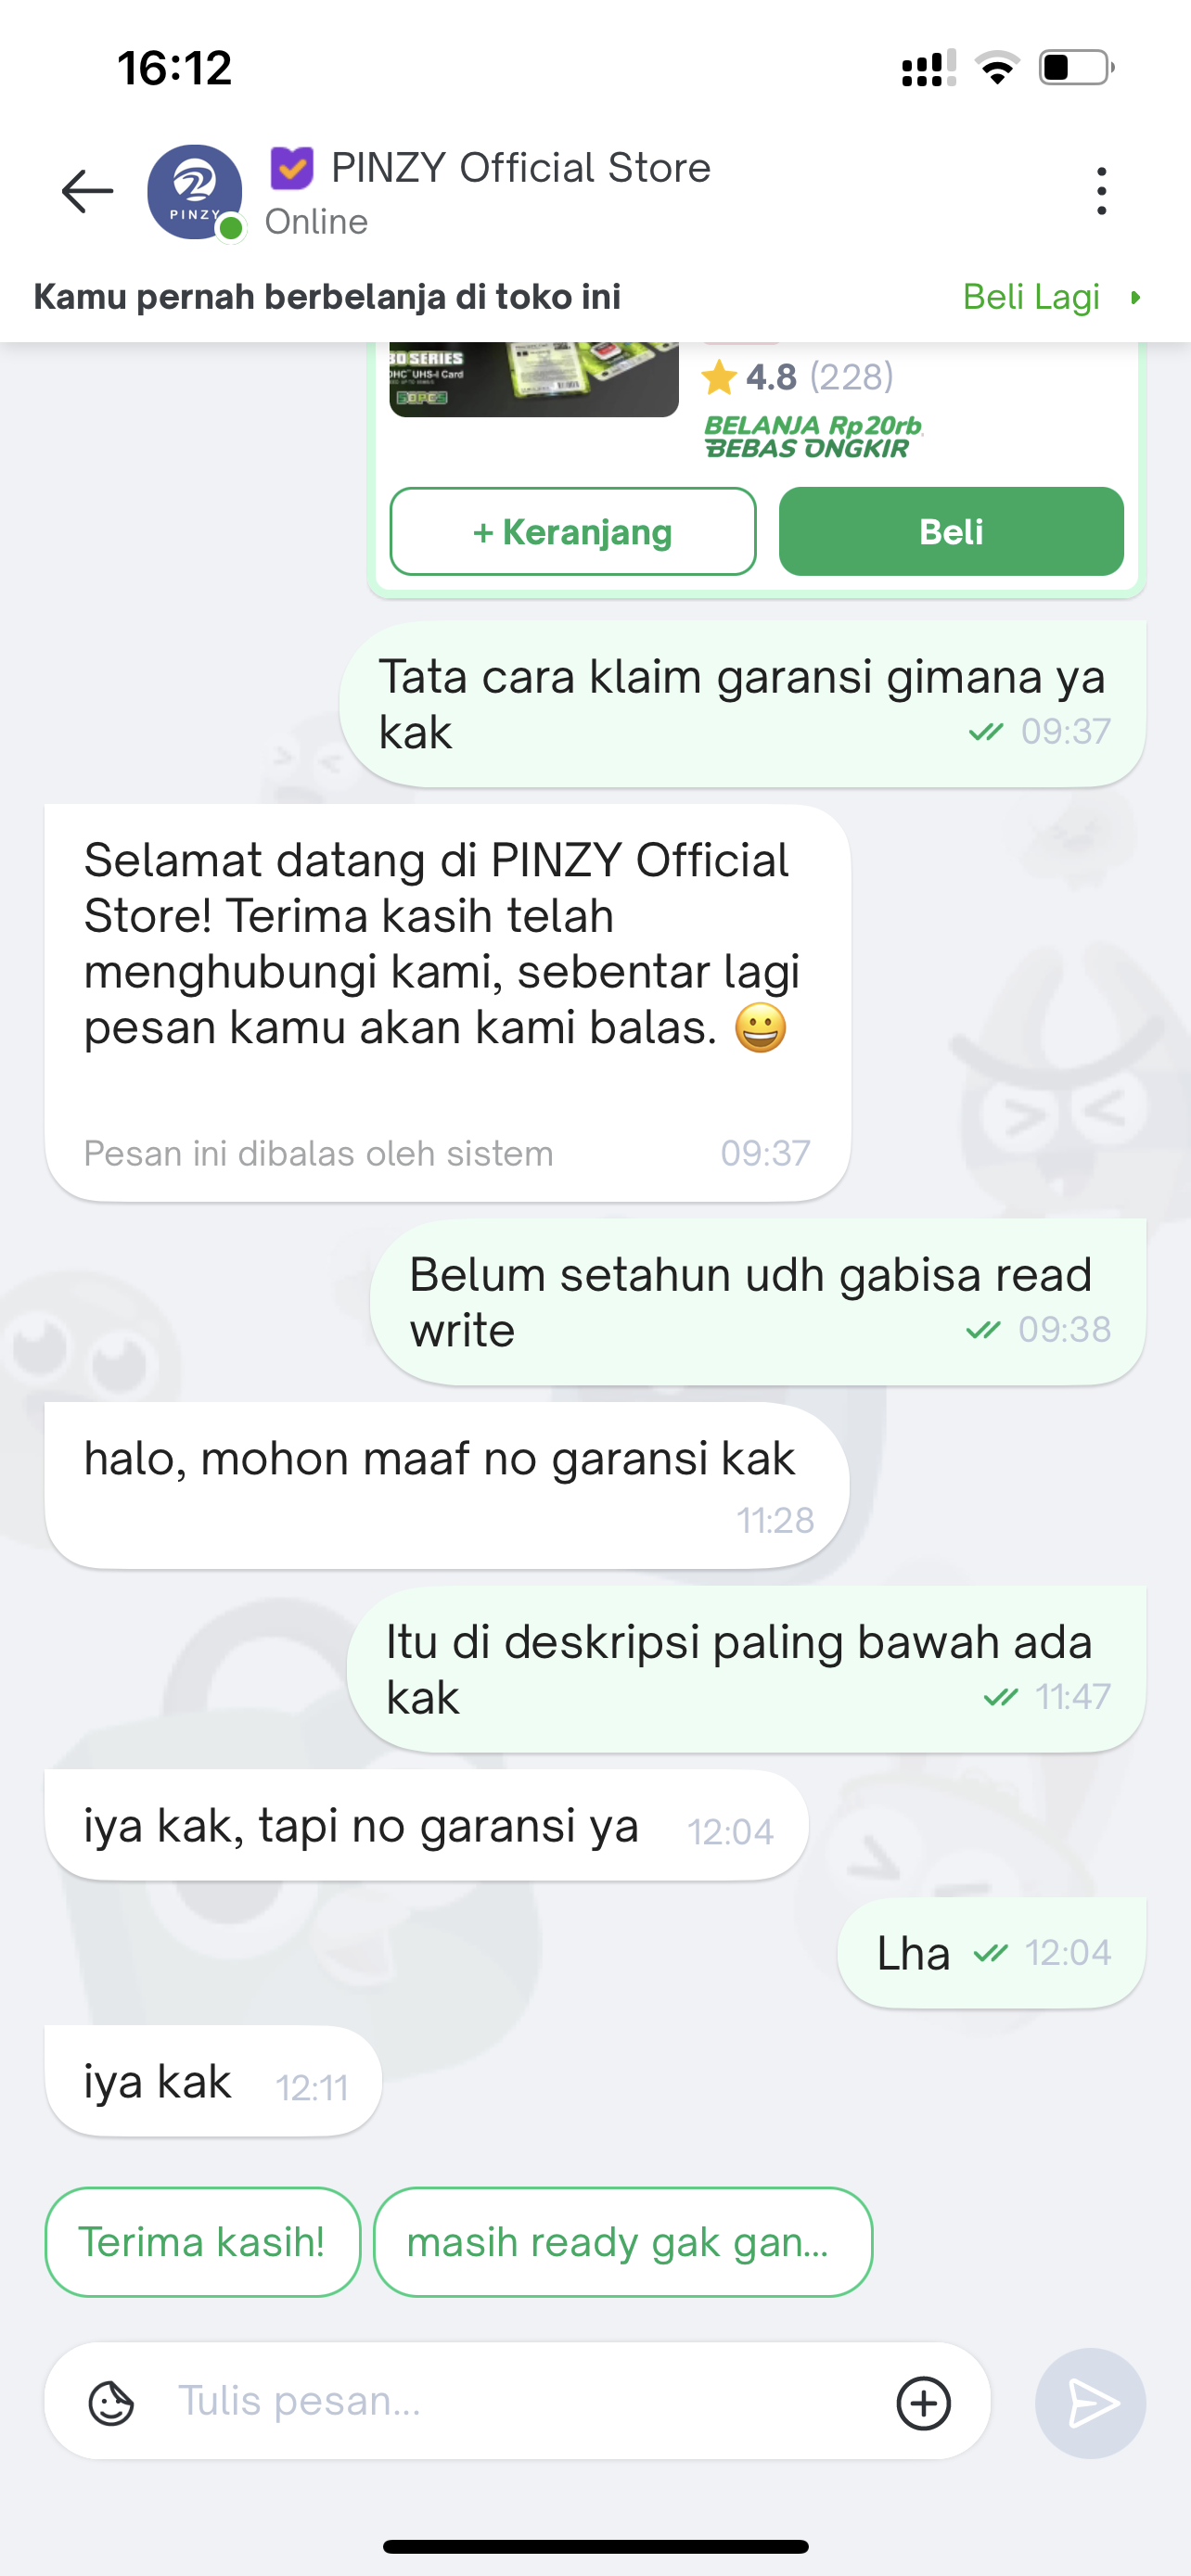 After Sales Pinzy Official Store Tokopedia